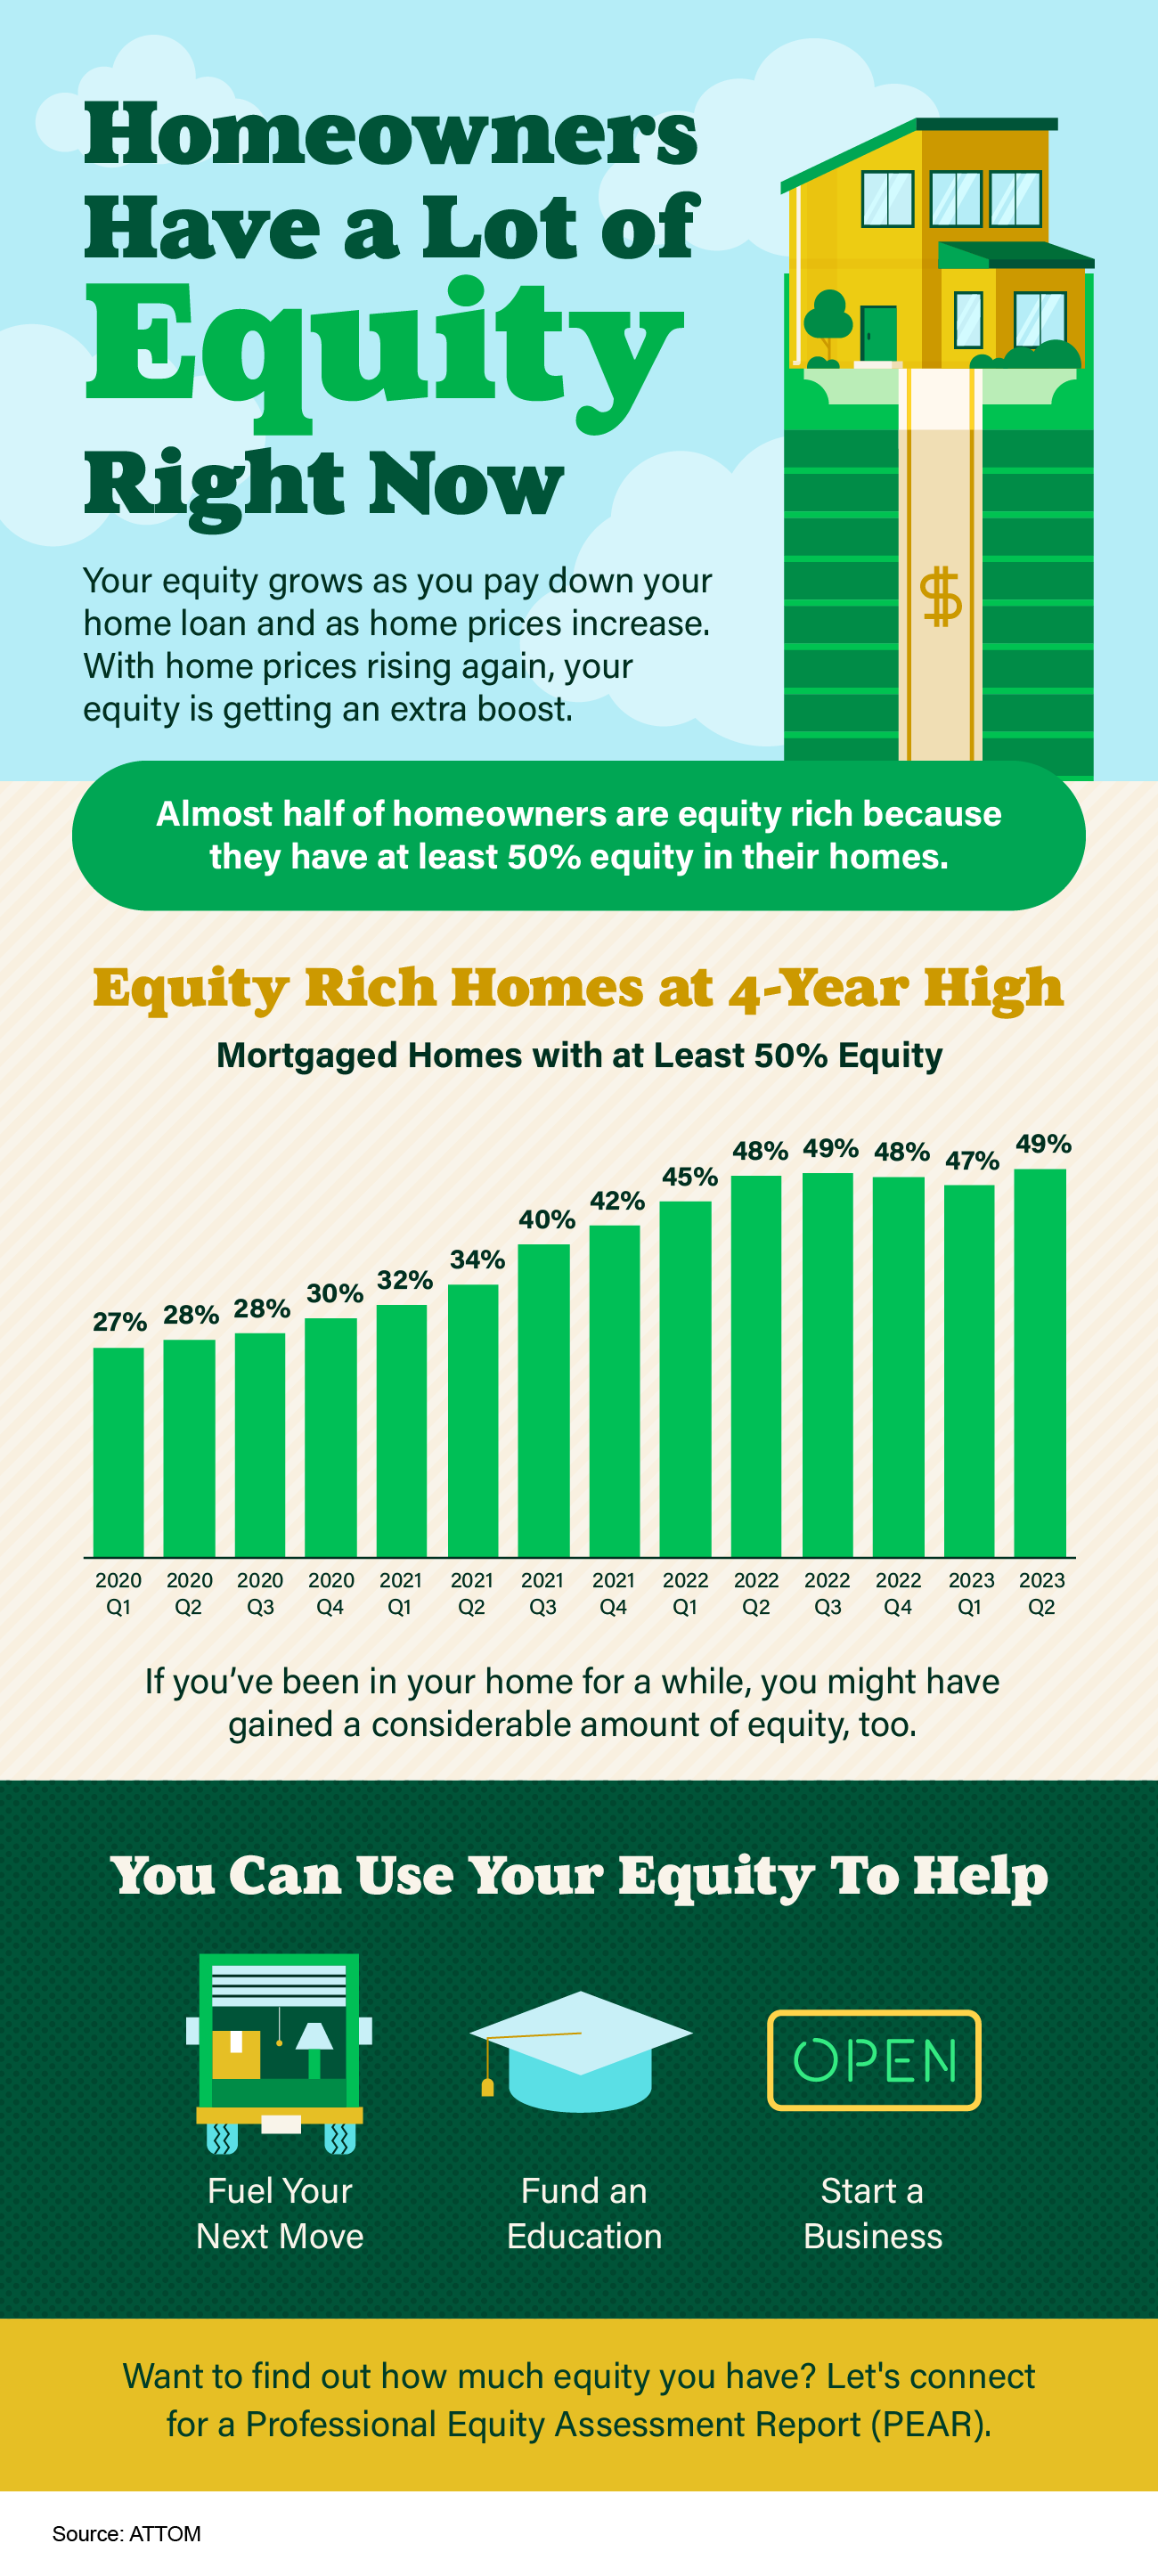 homeowners-have-a-lot-of-equity-right-now-infographic